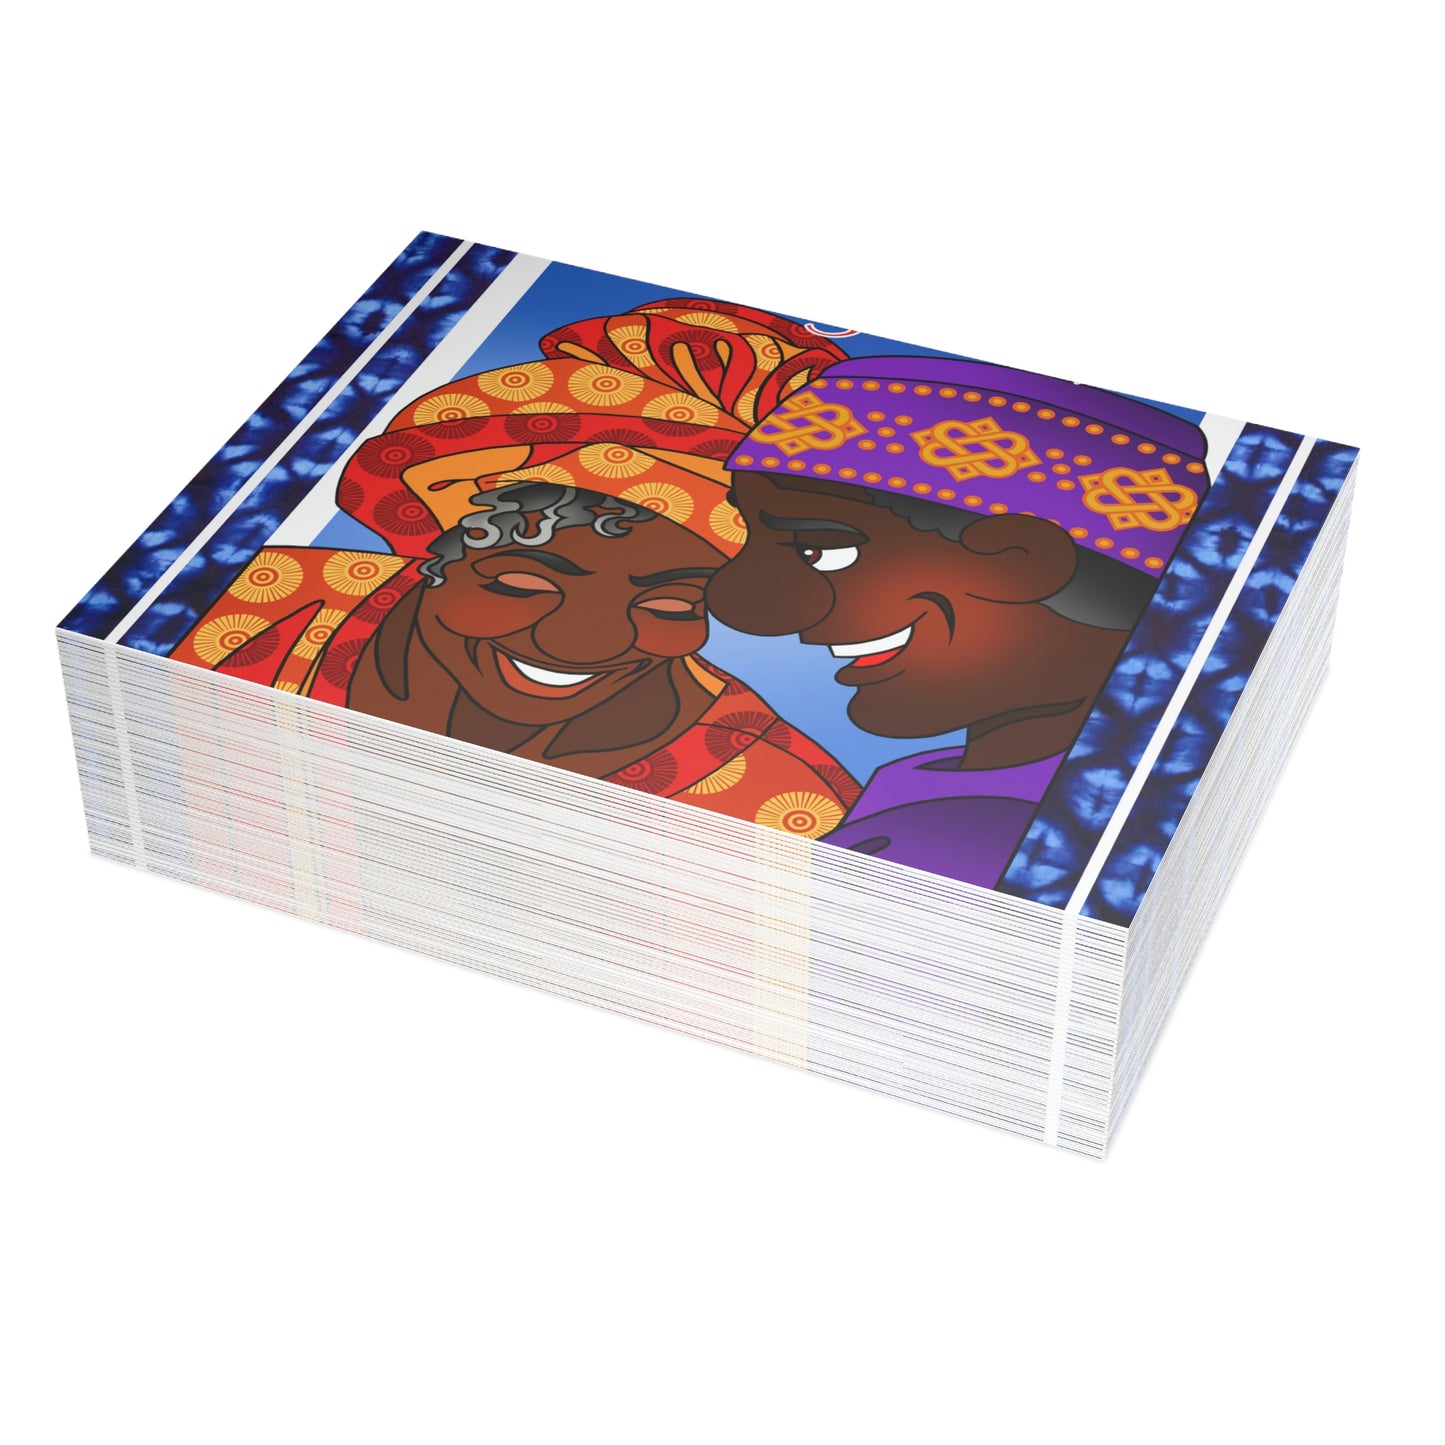 The Paramount Chief and One Wise Woman Greeting Card Bundles (envelopes not included)